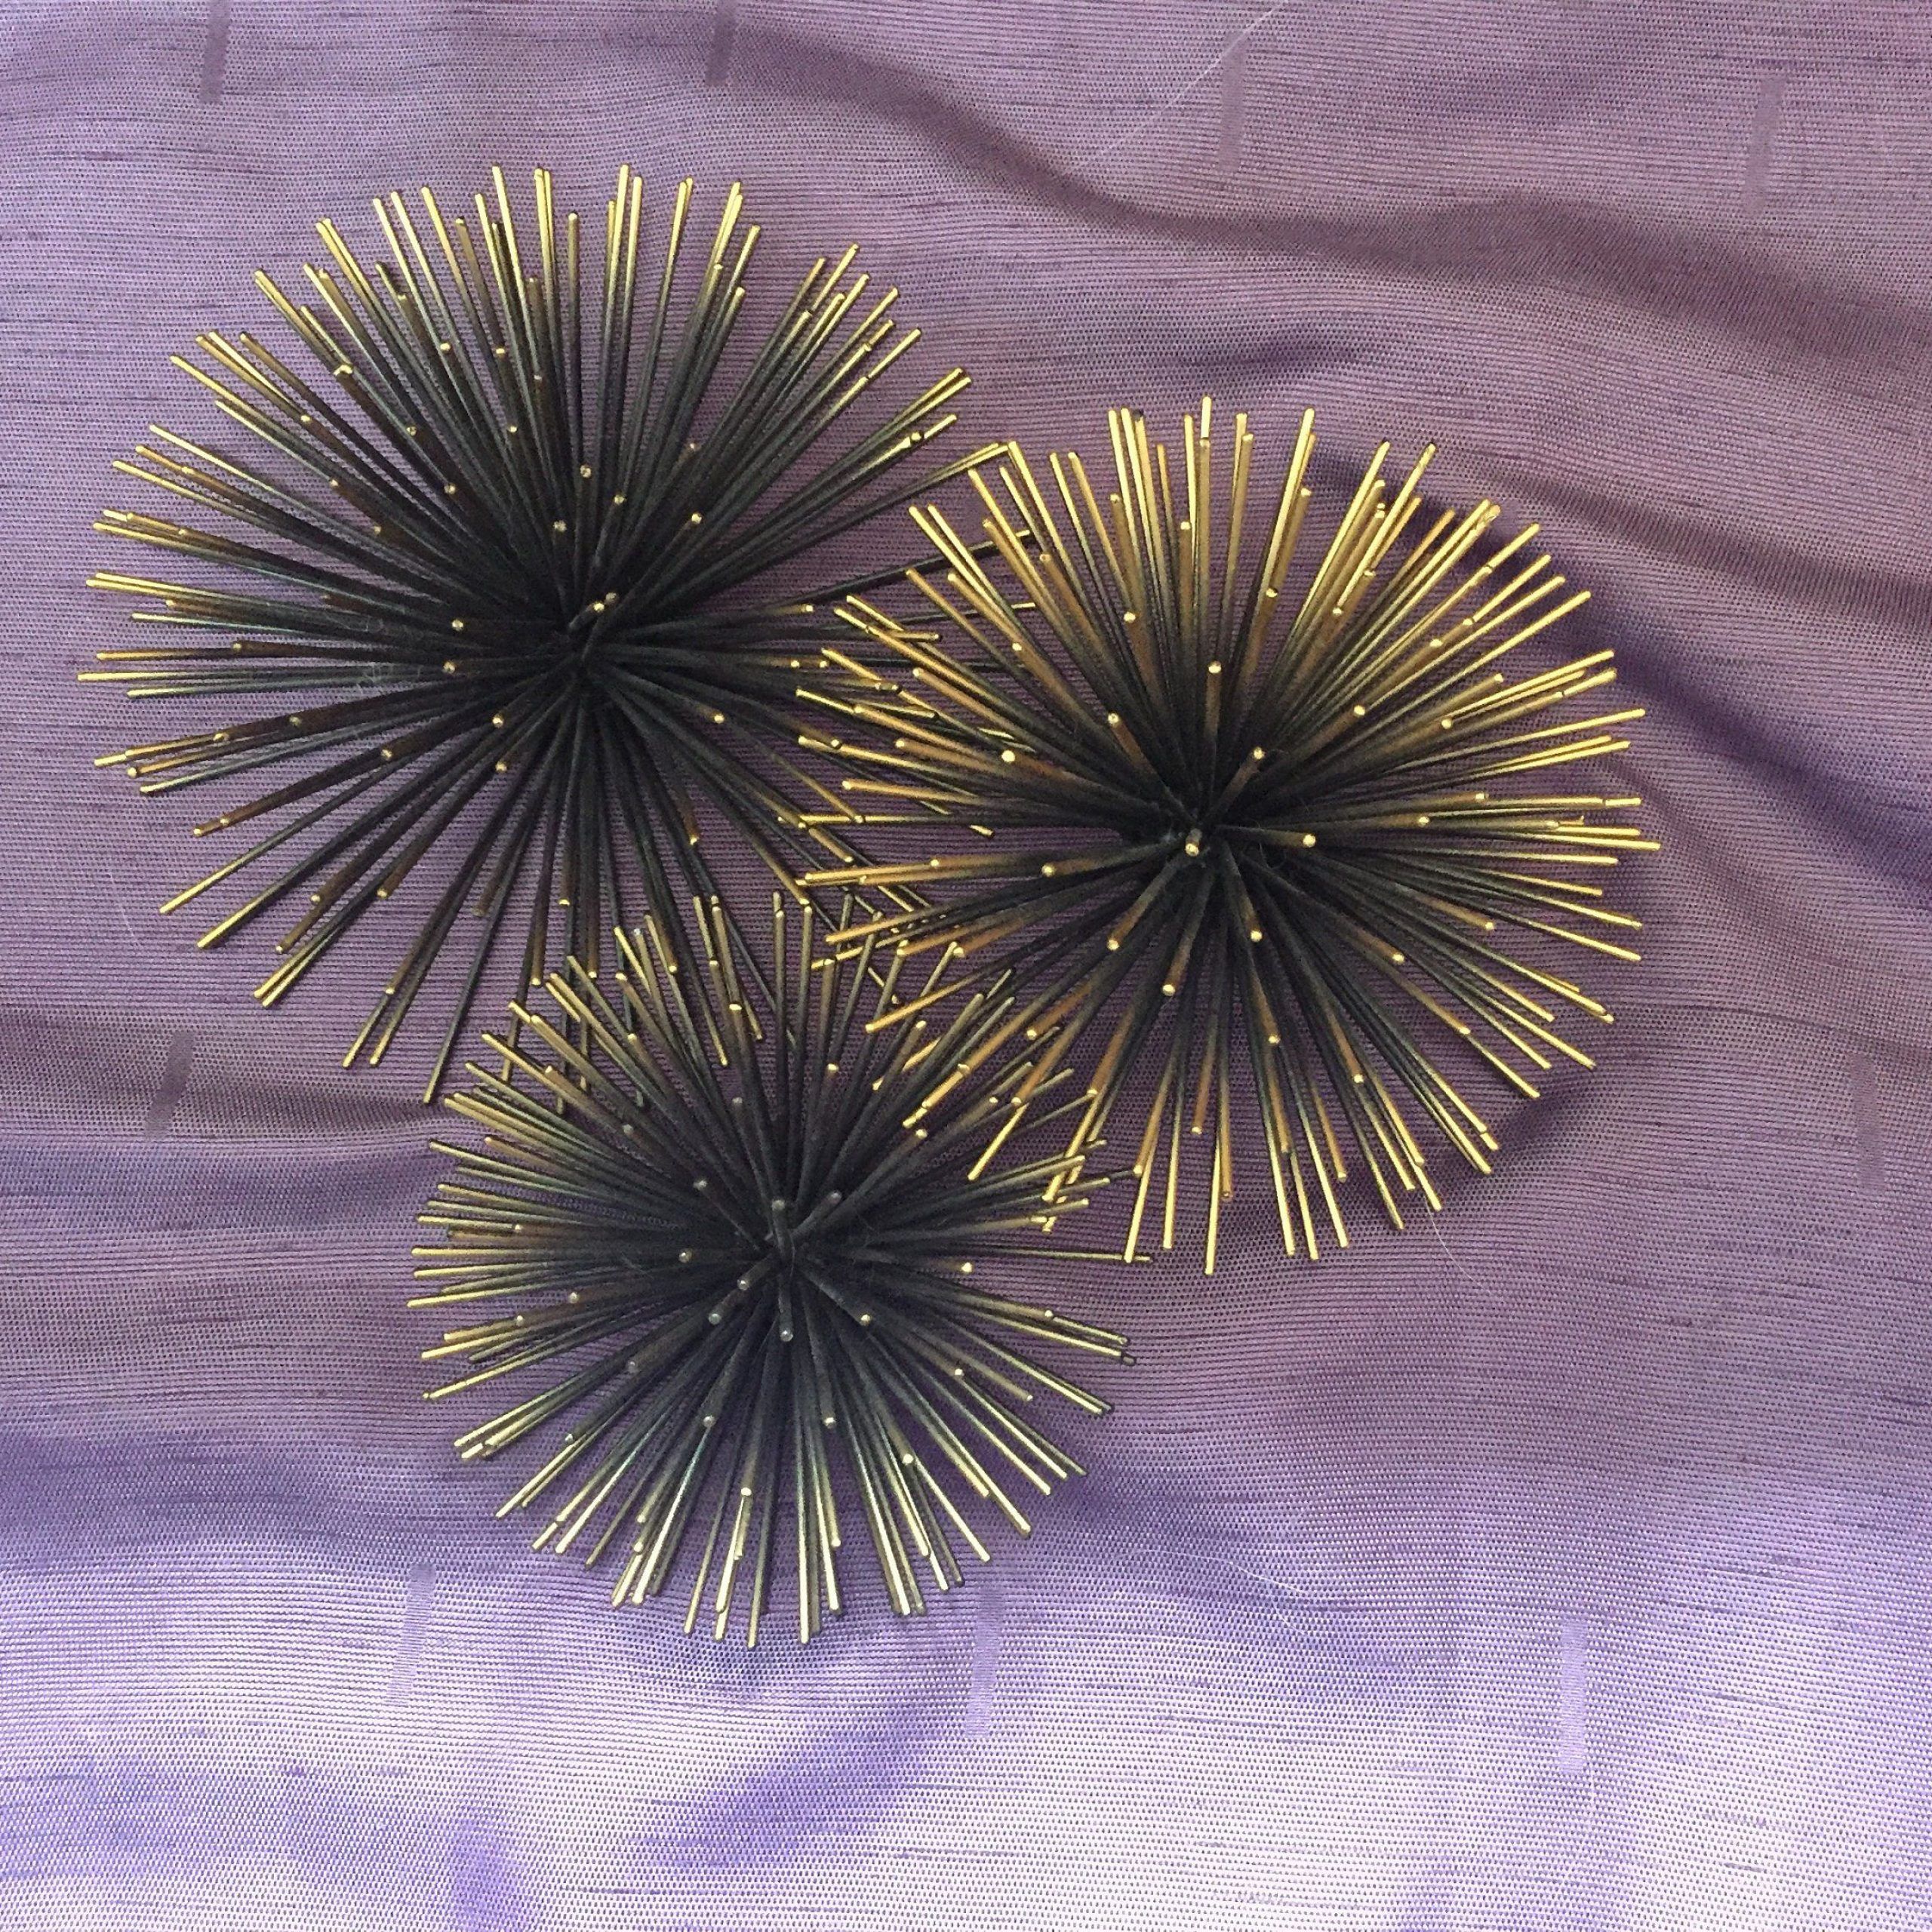 Well Known Gold And Black Metal Wall Art Throughout Art Deco Starburst Wall Art Metal Spike Decor Sculpture Gold & Black (View 2 of 15)